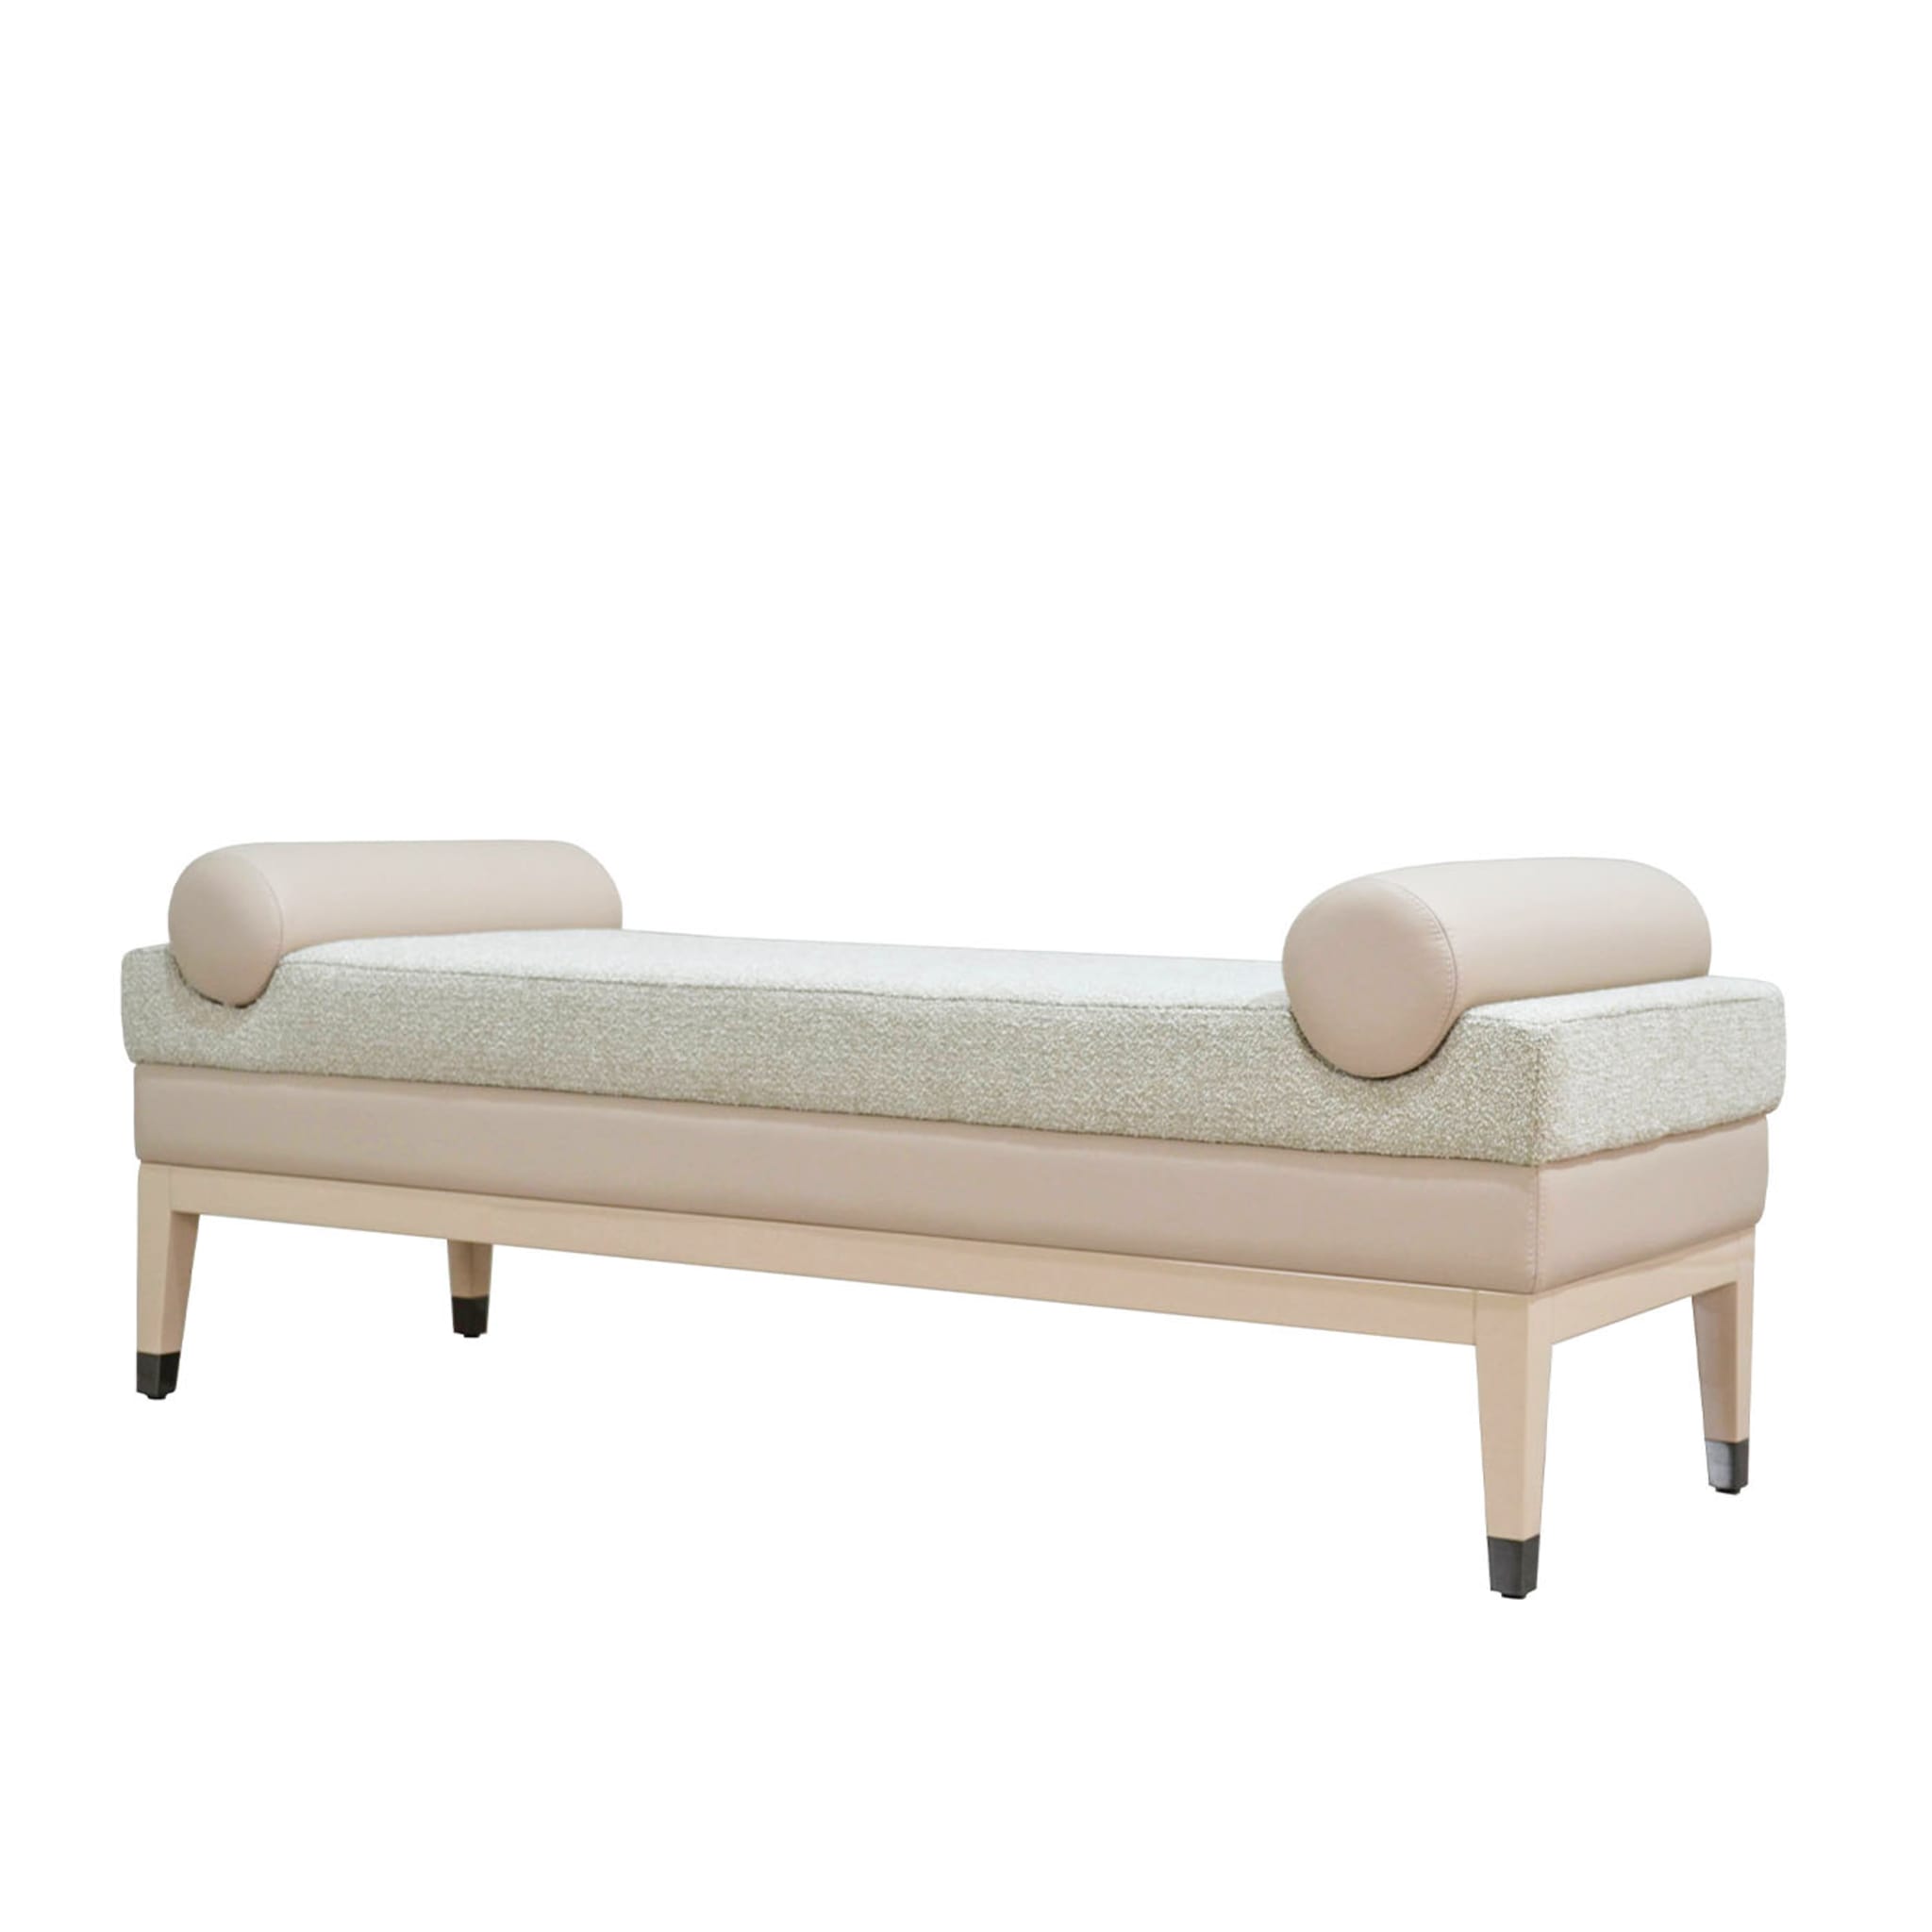 Italian Contemporary Upholstered Bench In Quinoa Fabric - Alternative view 2